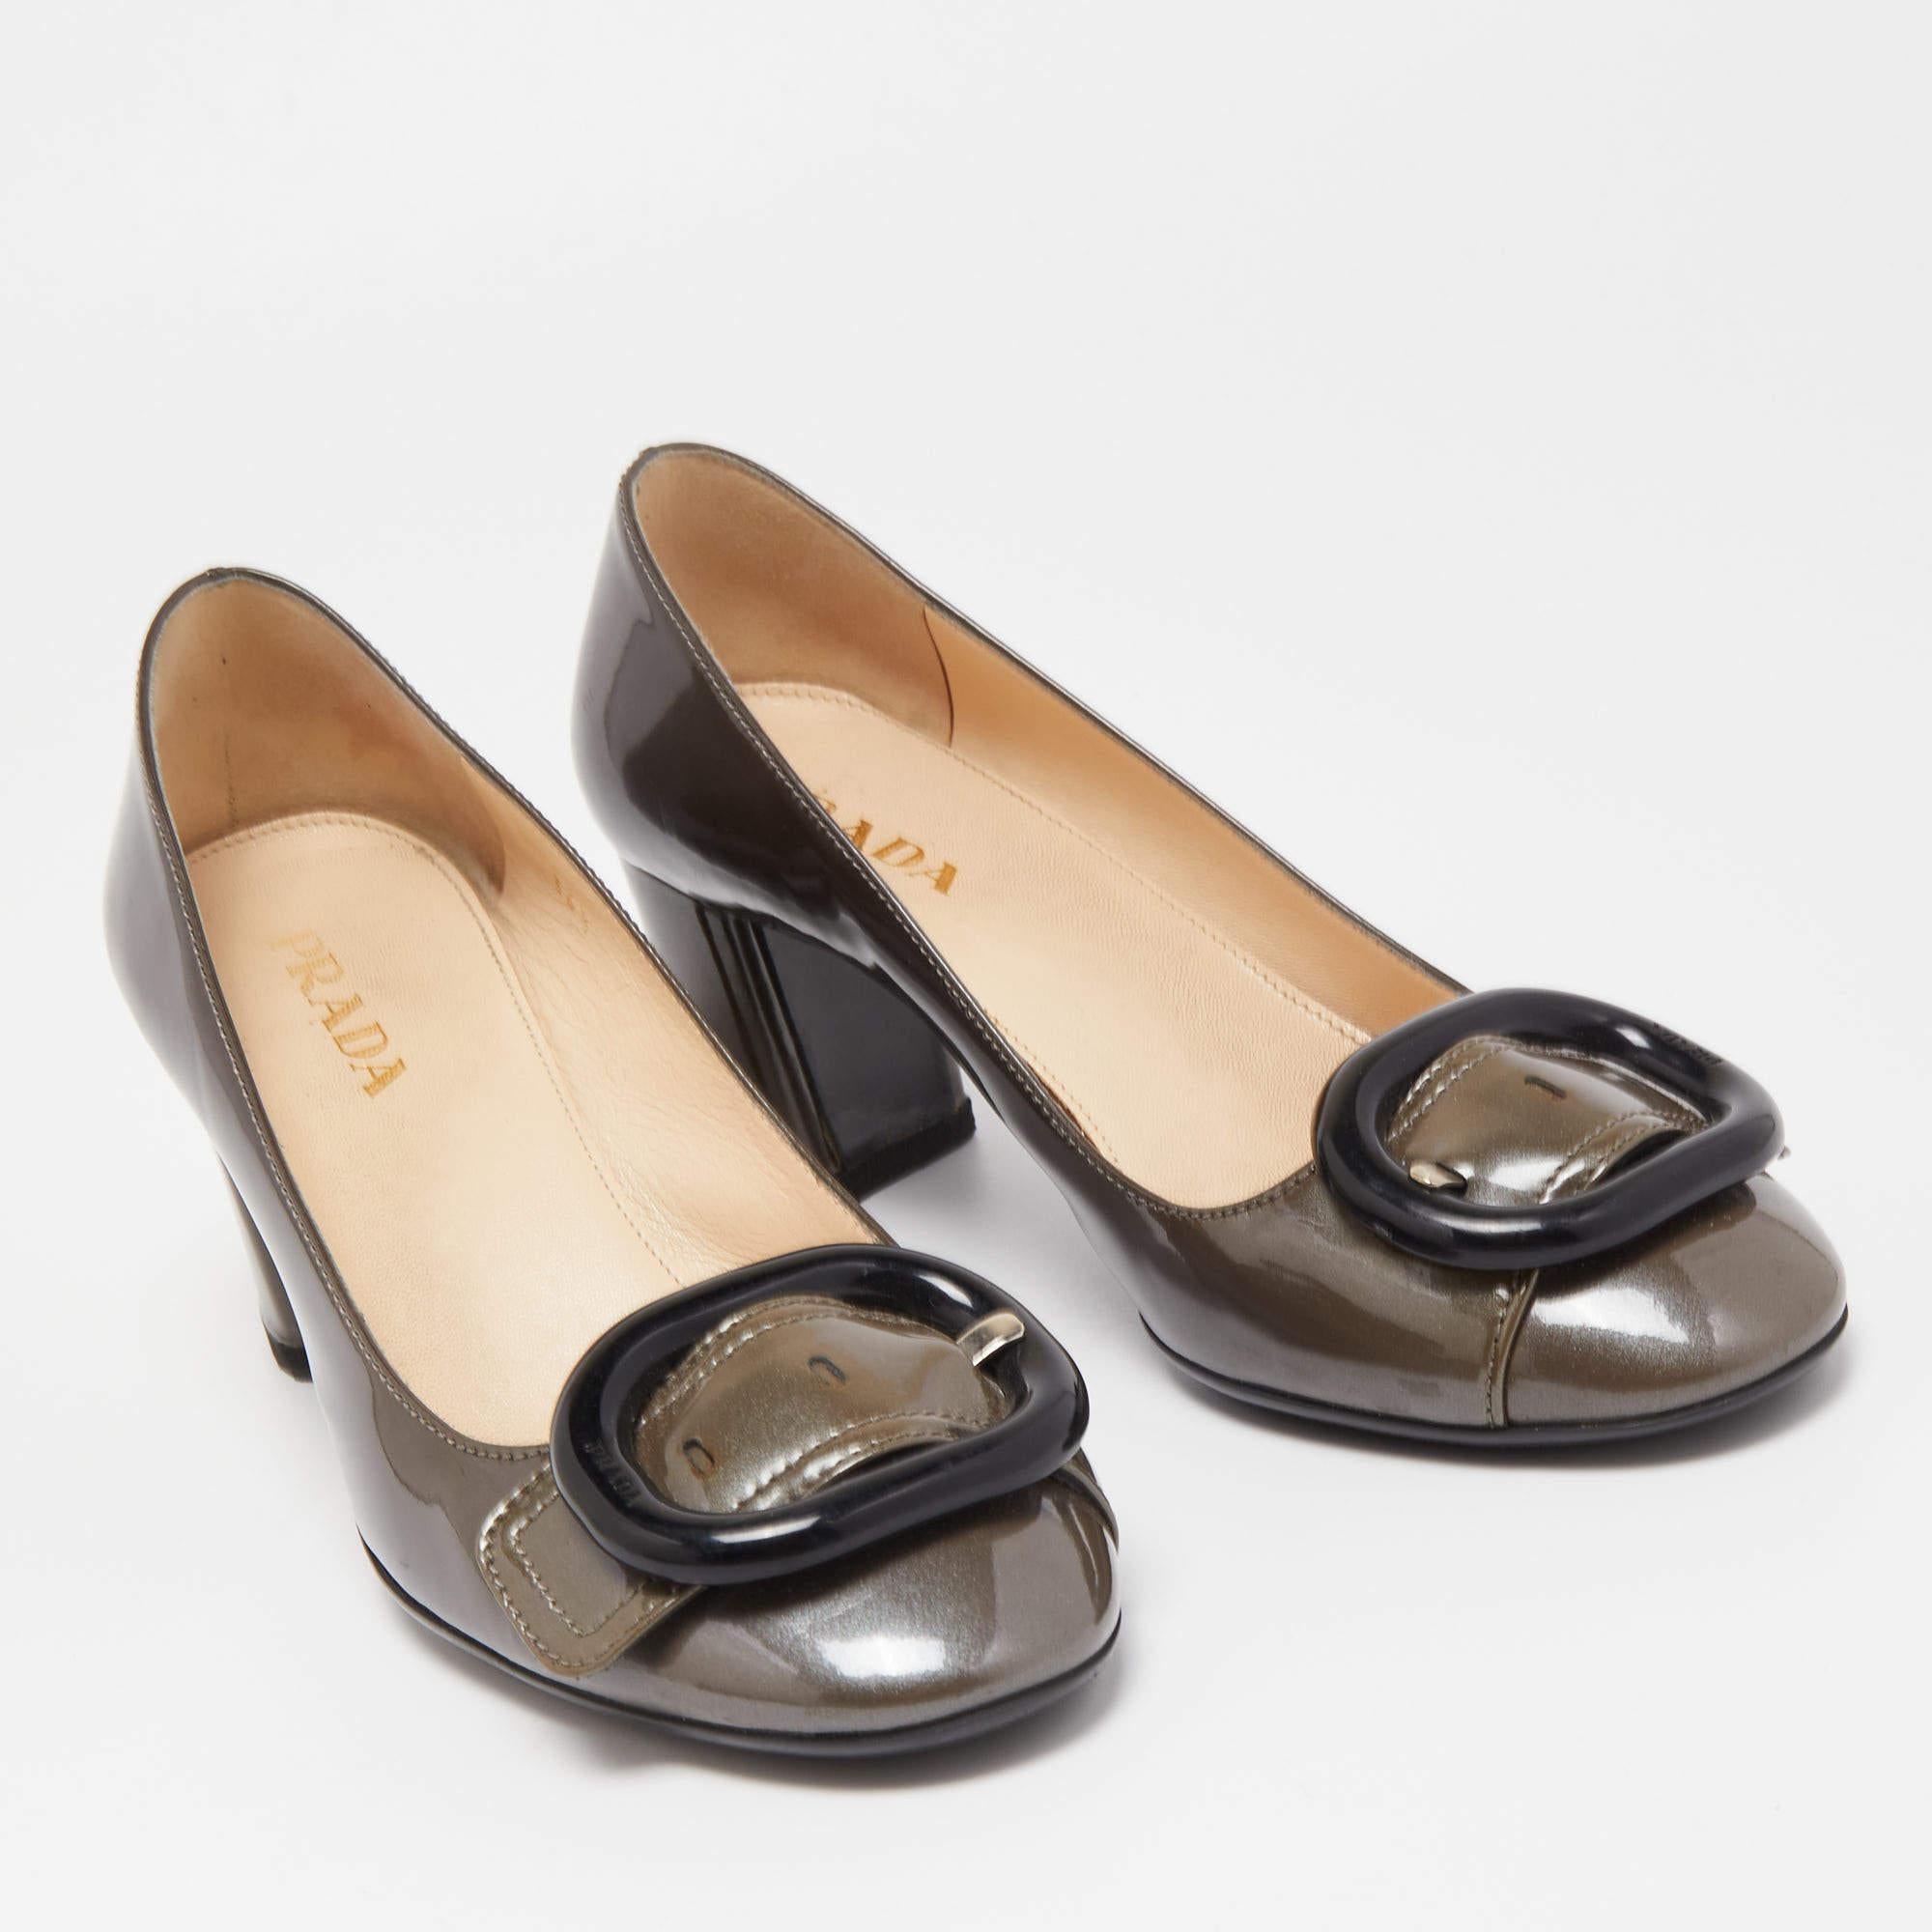 Wonderfully crafted shoes added with notable elements to fit well and pair perfectly with all your plans. Make these Prada patent leather pumps yours today!

